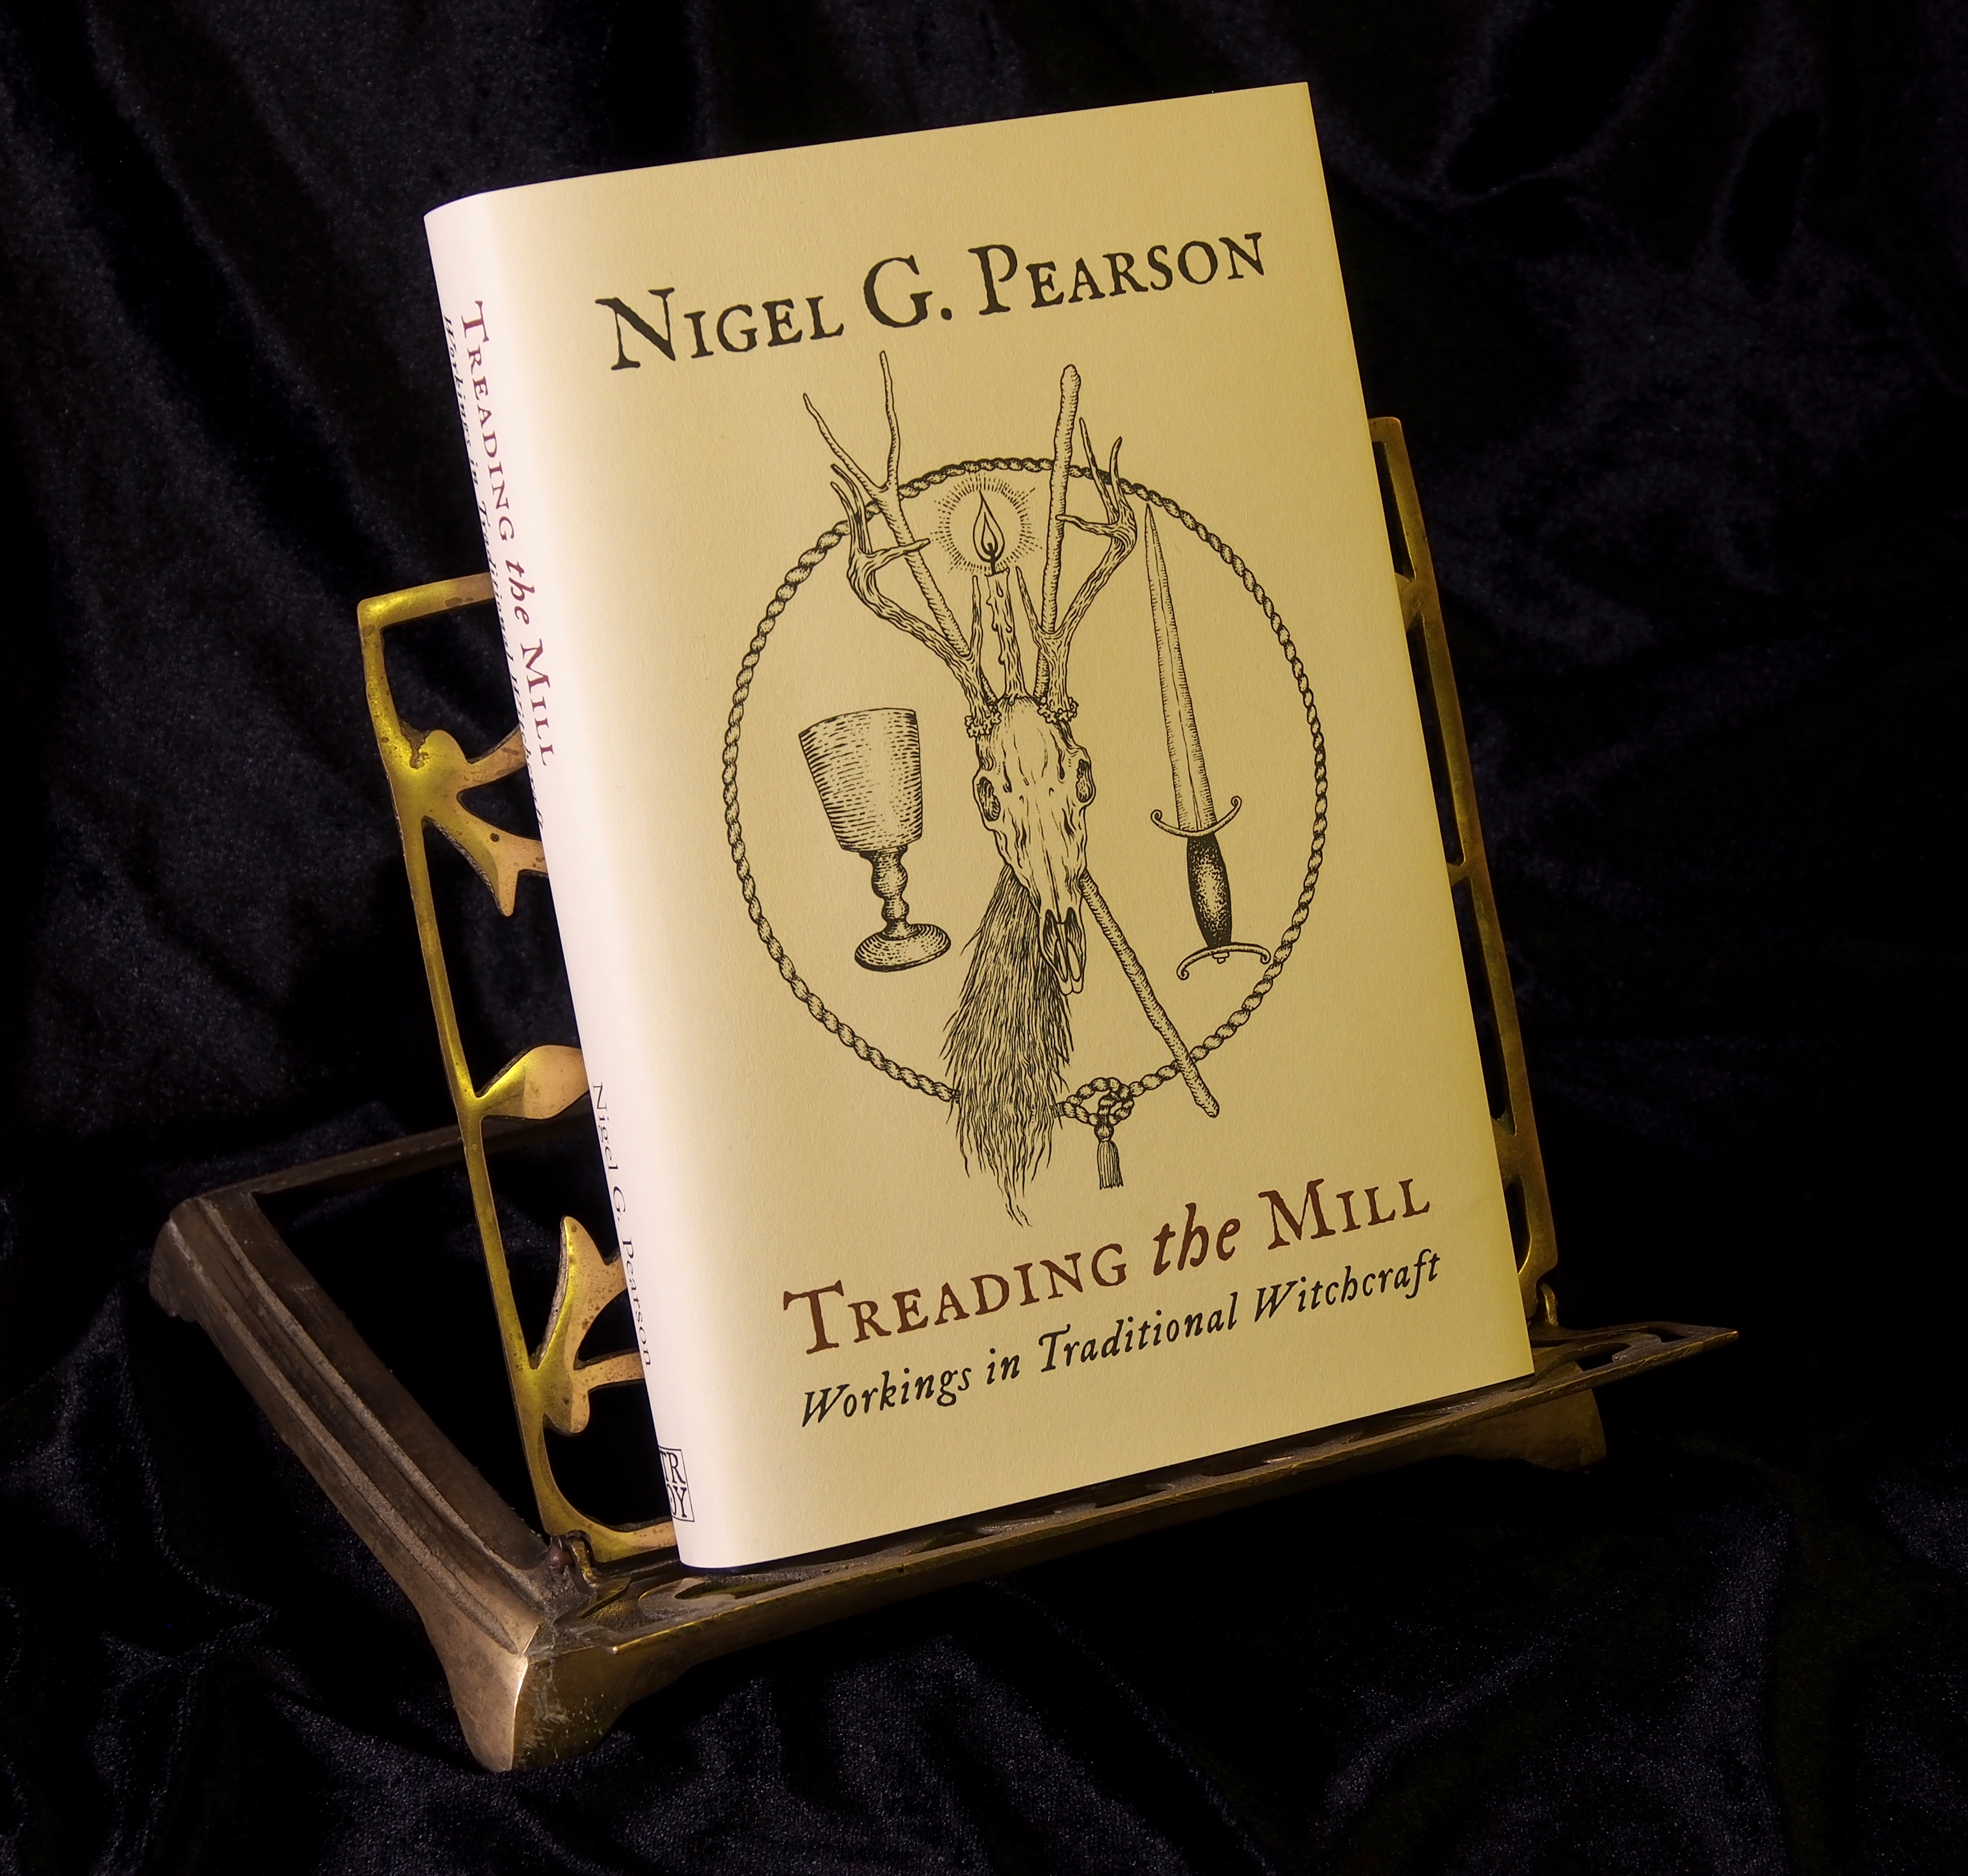 "Treading the Mill: Workings in Traditional Witchcraft", by Nigel G. Pearson. Standard hardback.